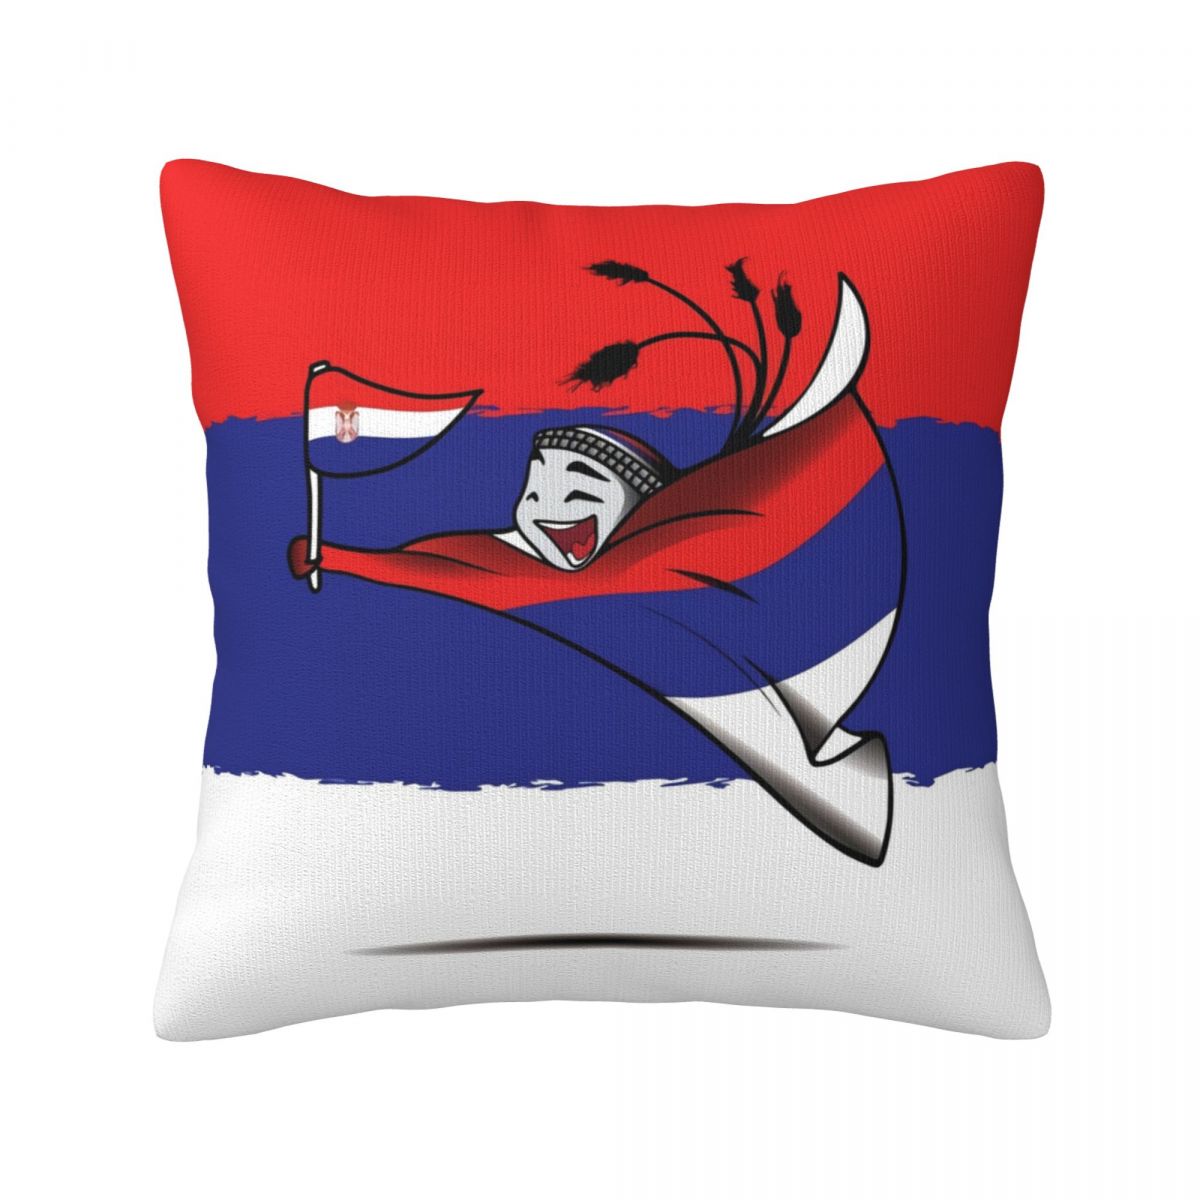 Serbia World Cup 2022 Mascot Throw Pillow Covers 18x18